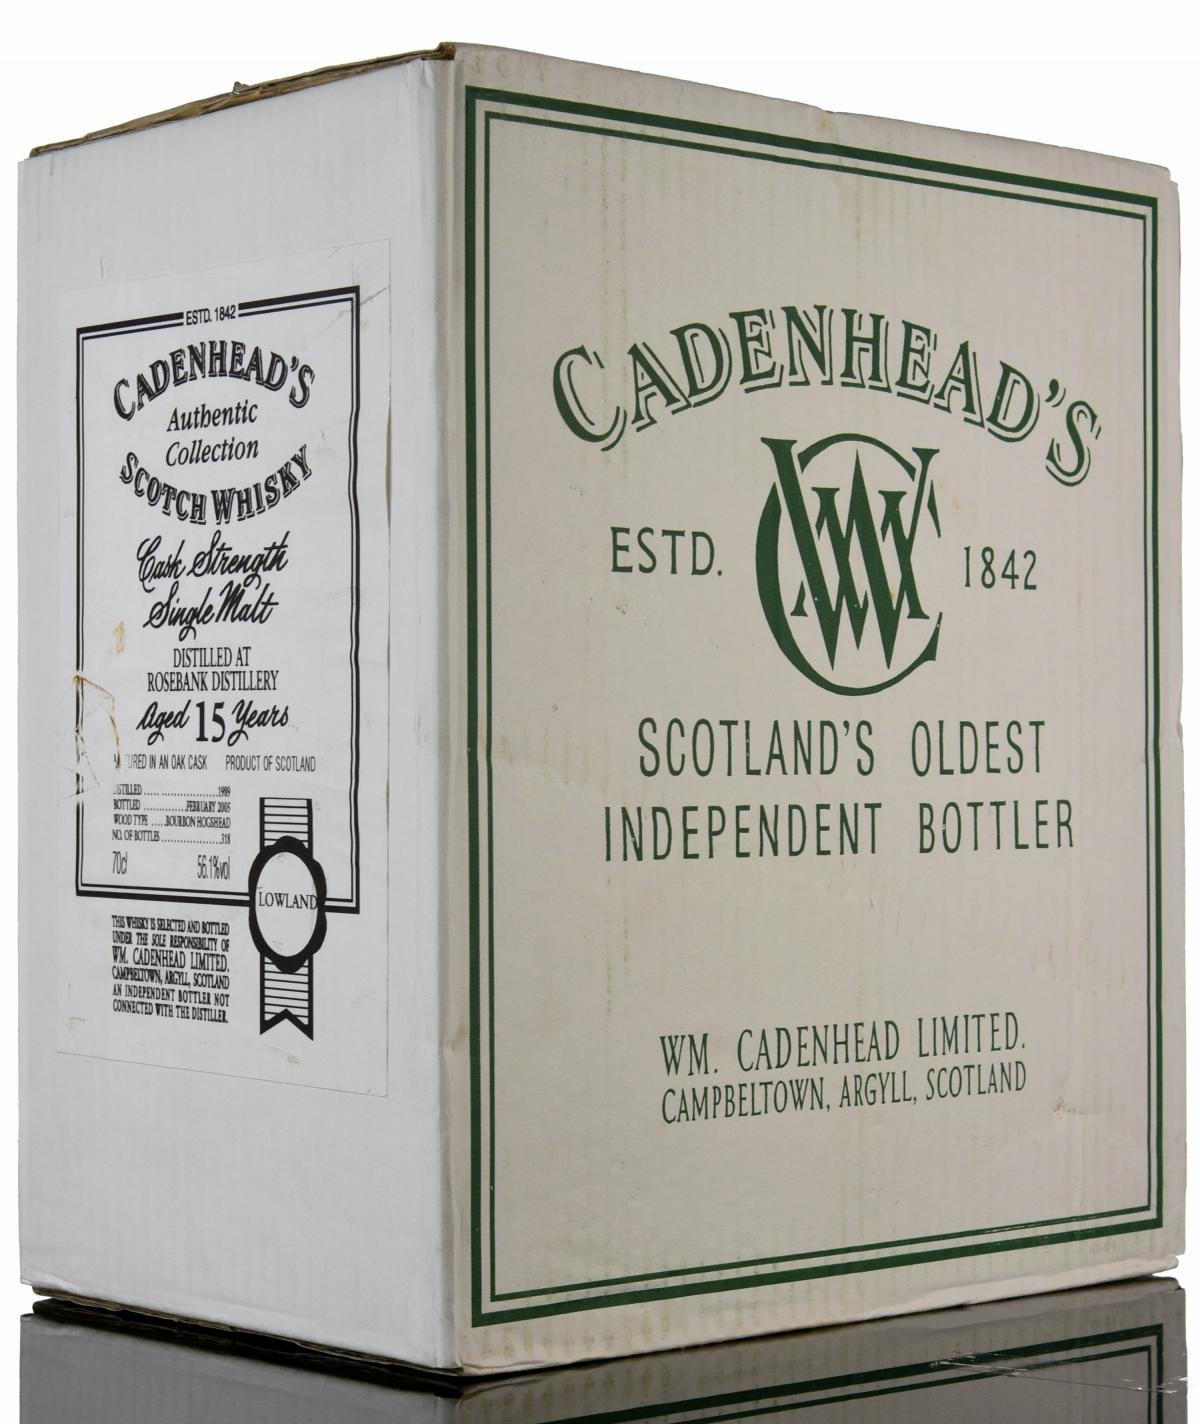 Sealed Case Rosebank 1989-2005 - 15 Year Old - Cadenheads Authentic Collection